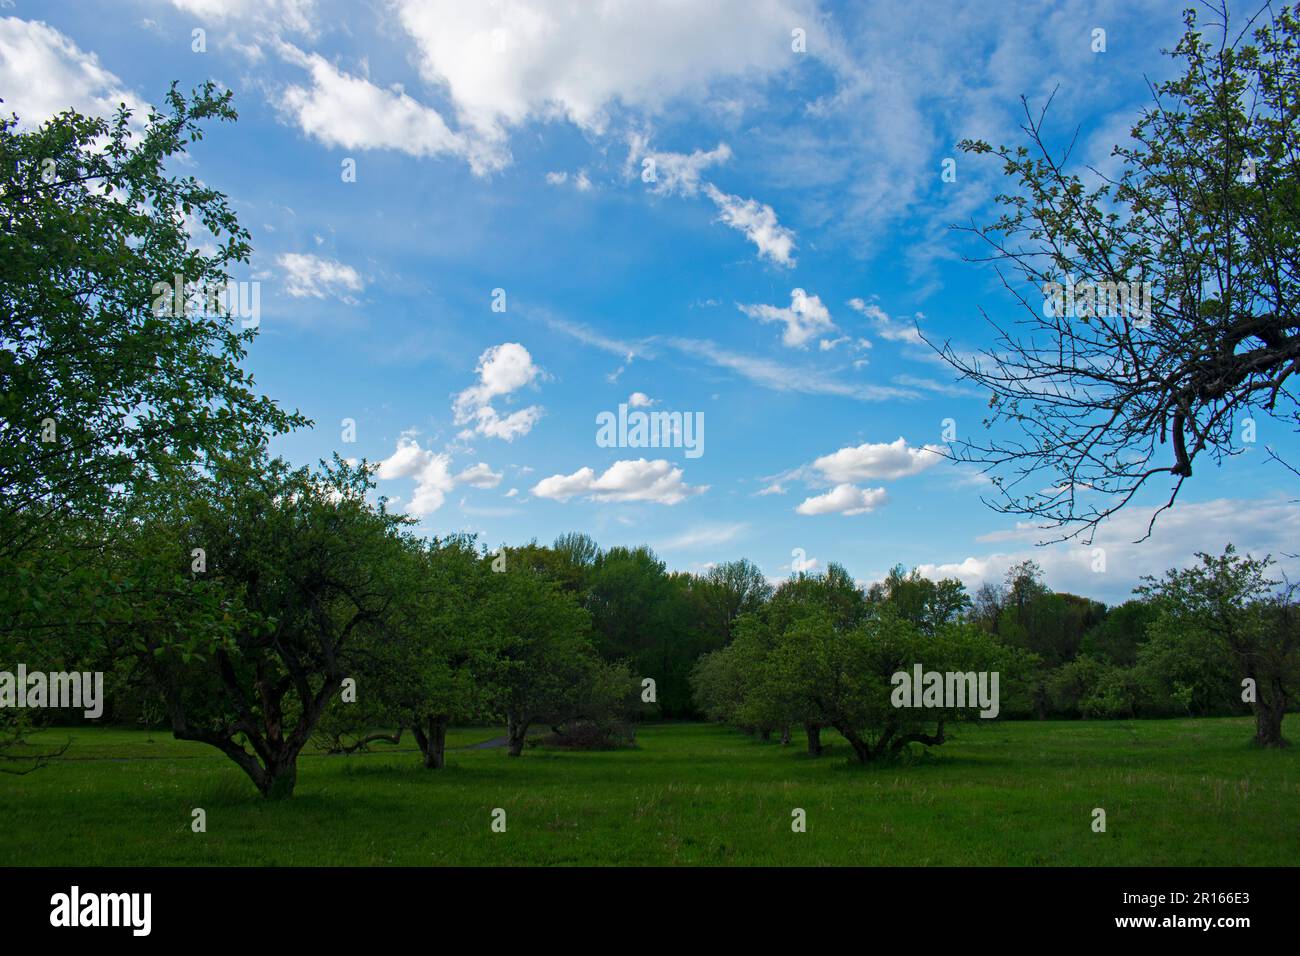 Peaceful cumulus and stratus clouds hover over a local park in the suburban town of Old Bridge, New Jersey, USA -09 Stock Photo